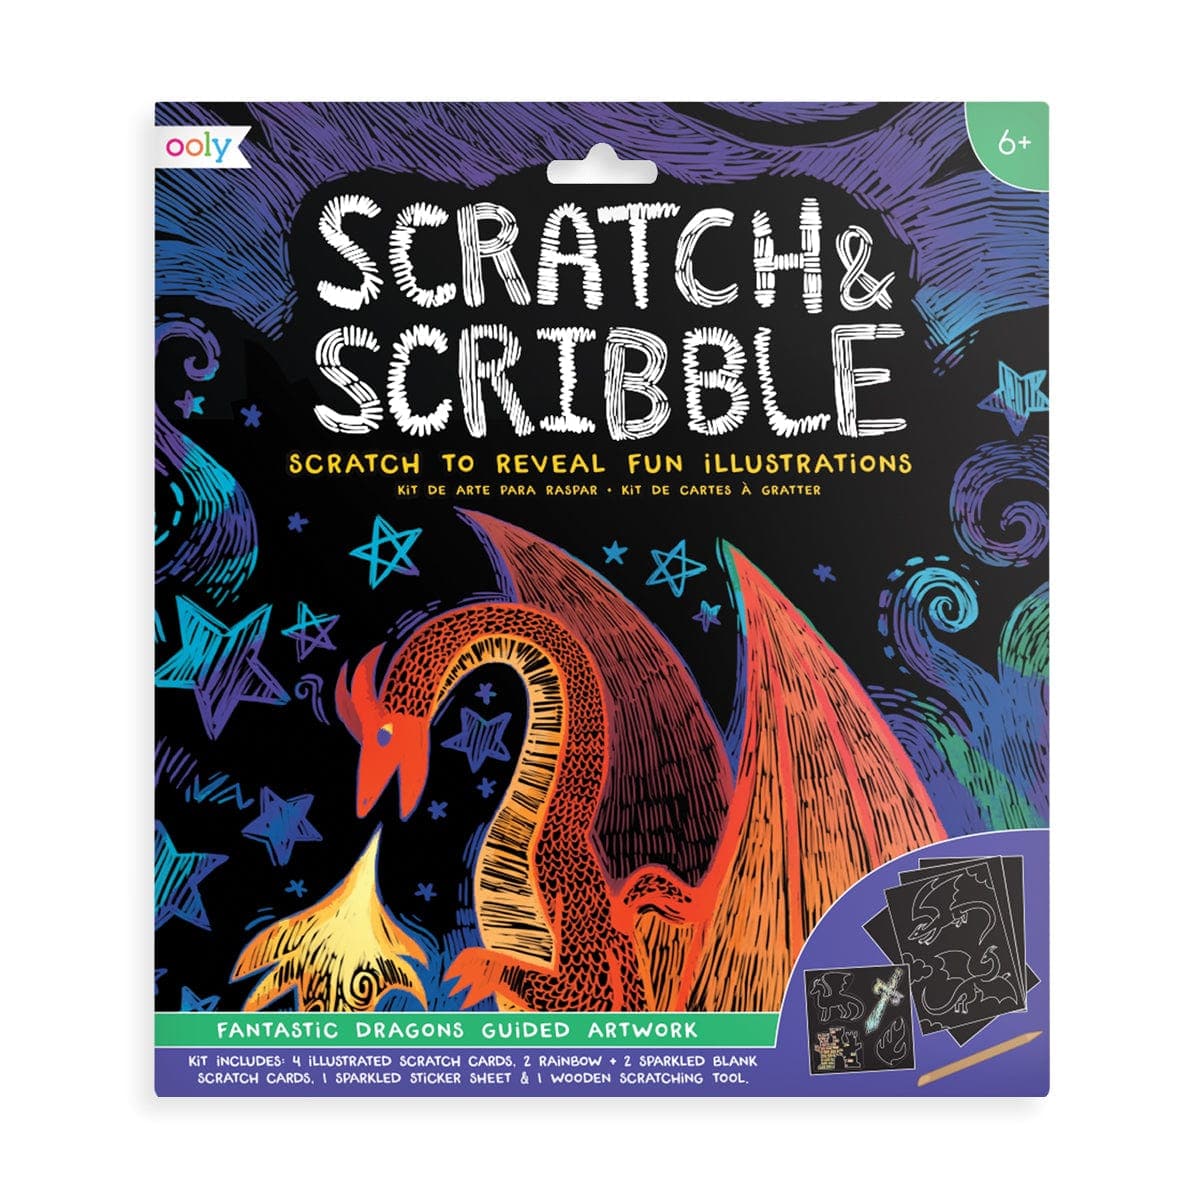 Ooly-Scratch and Scribble Scratch Art Kit - Fantastic Dragons-161-026-Legacy Toys